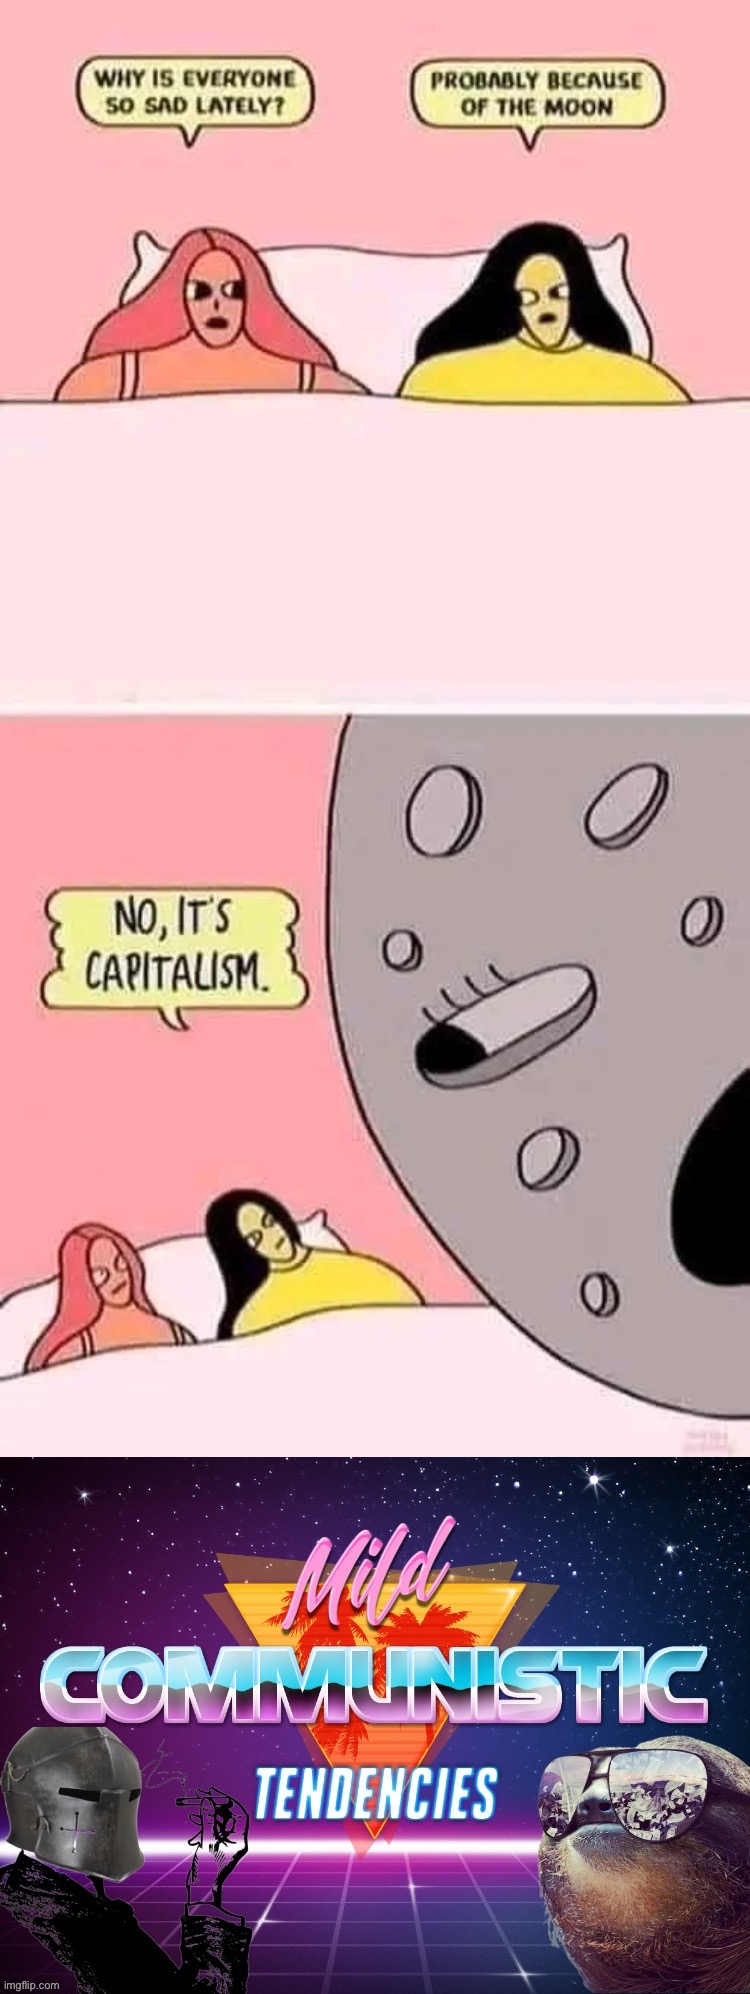 [Mandatory Communist Indoctrination] | image tagged in capitalism is why everyone s so sad,sloth rmk mild communistic tendencies,mandatory,communist,indoctrination,sloth | made w/ Imgflip meme maker